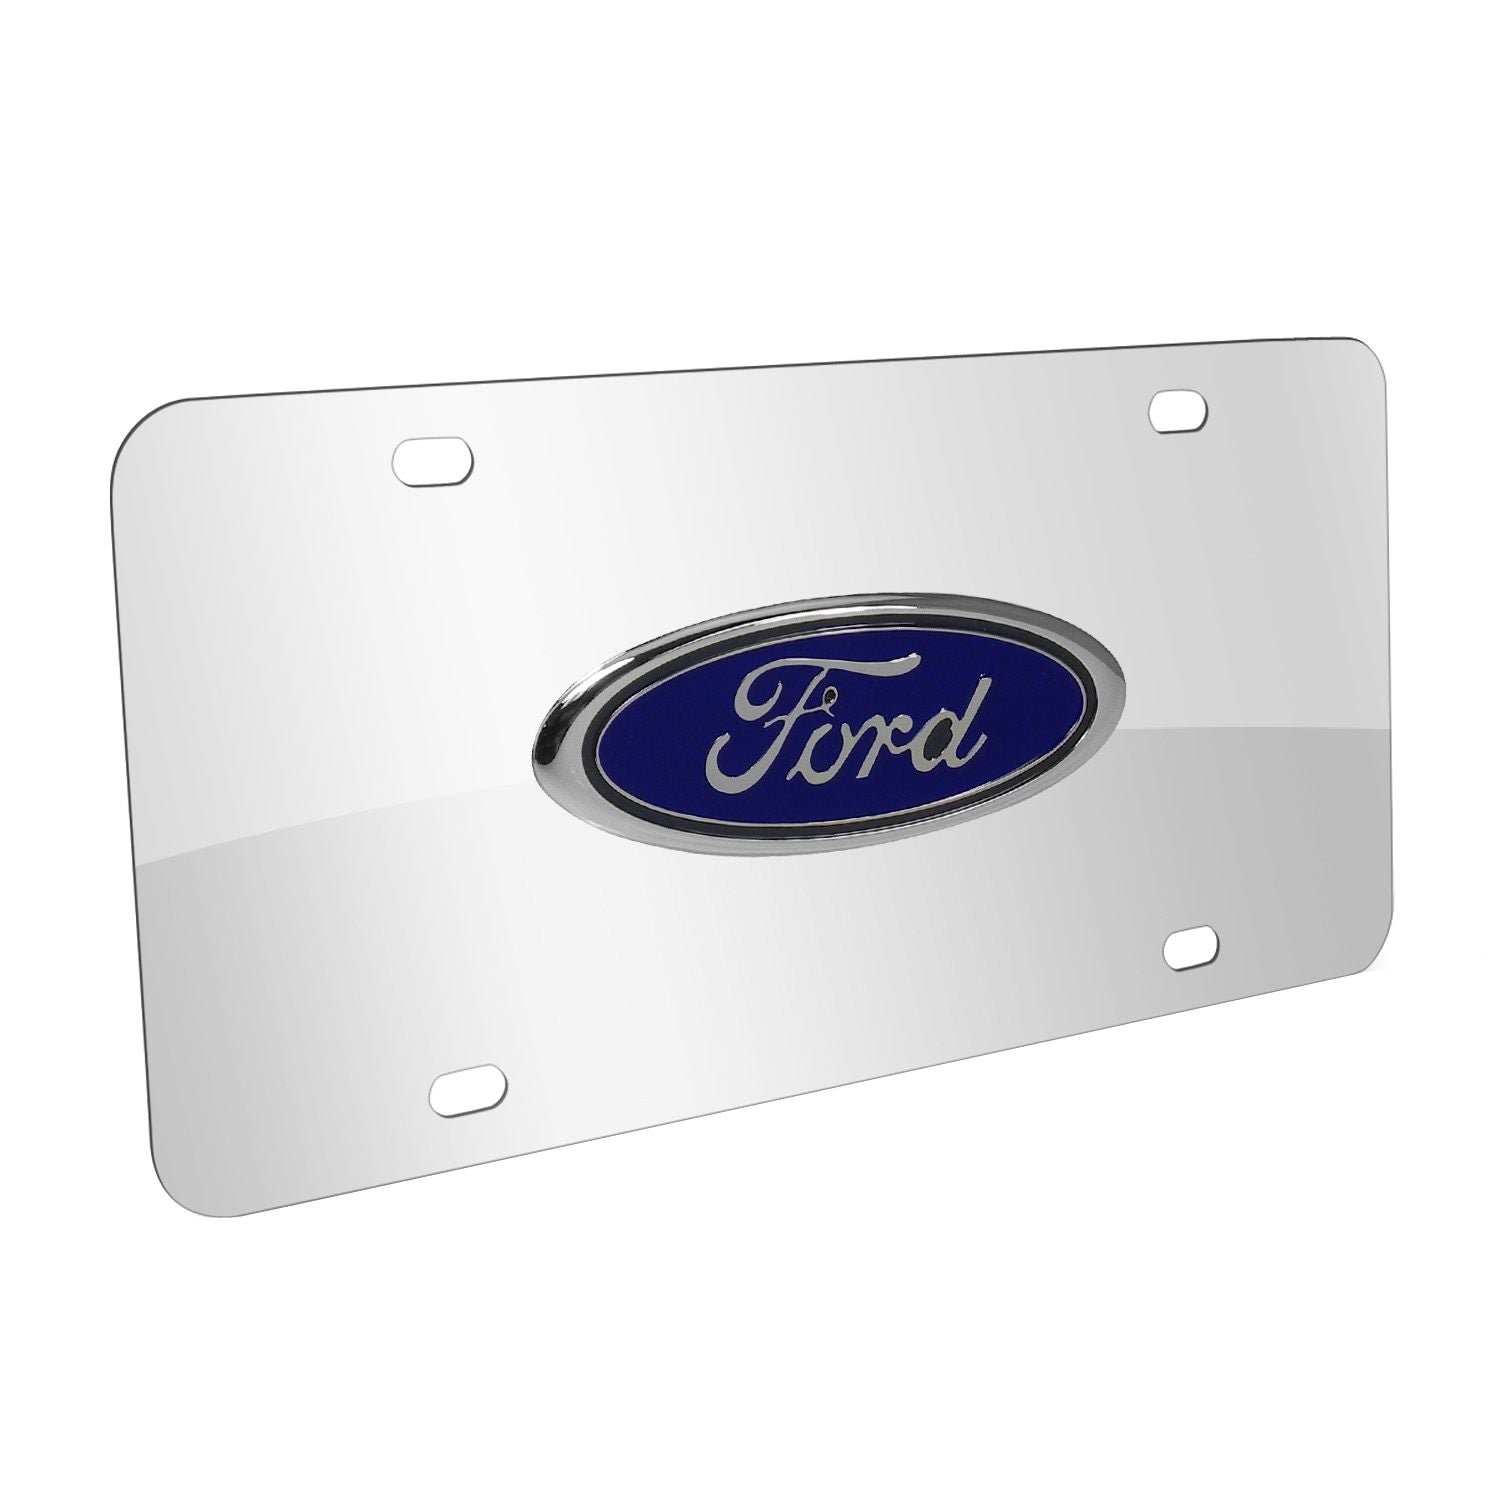 Ford License Plate